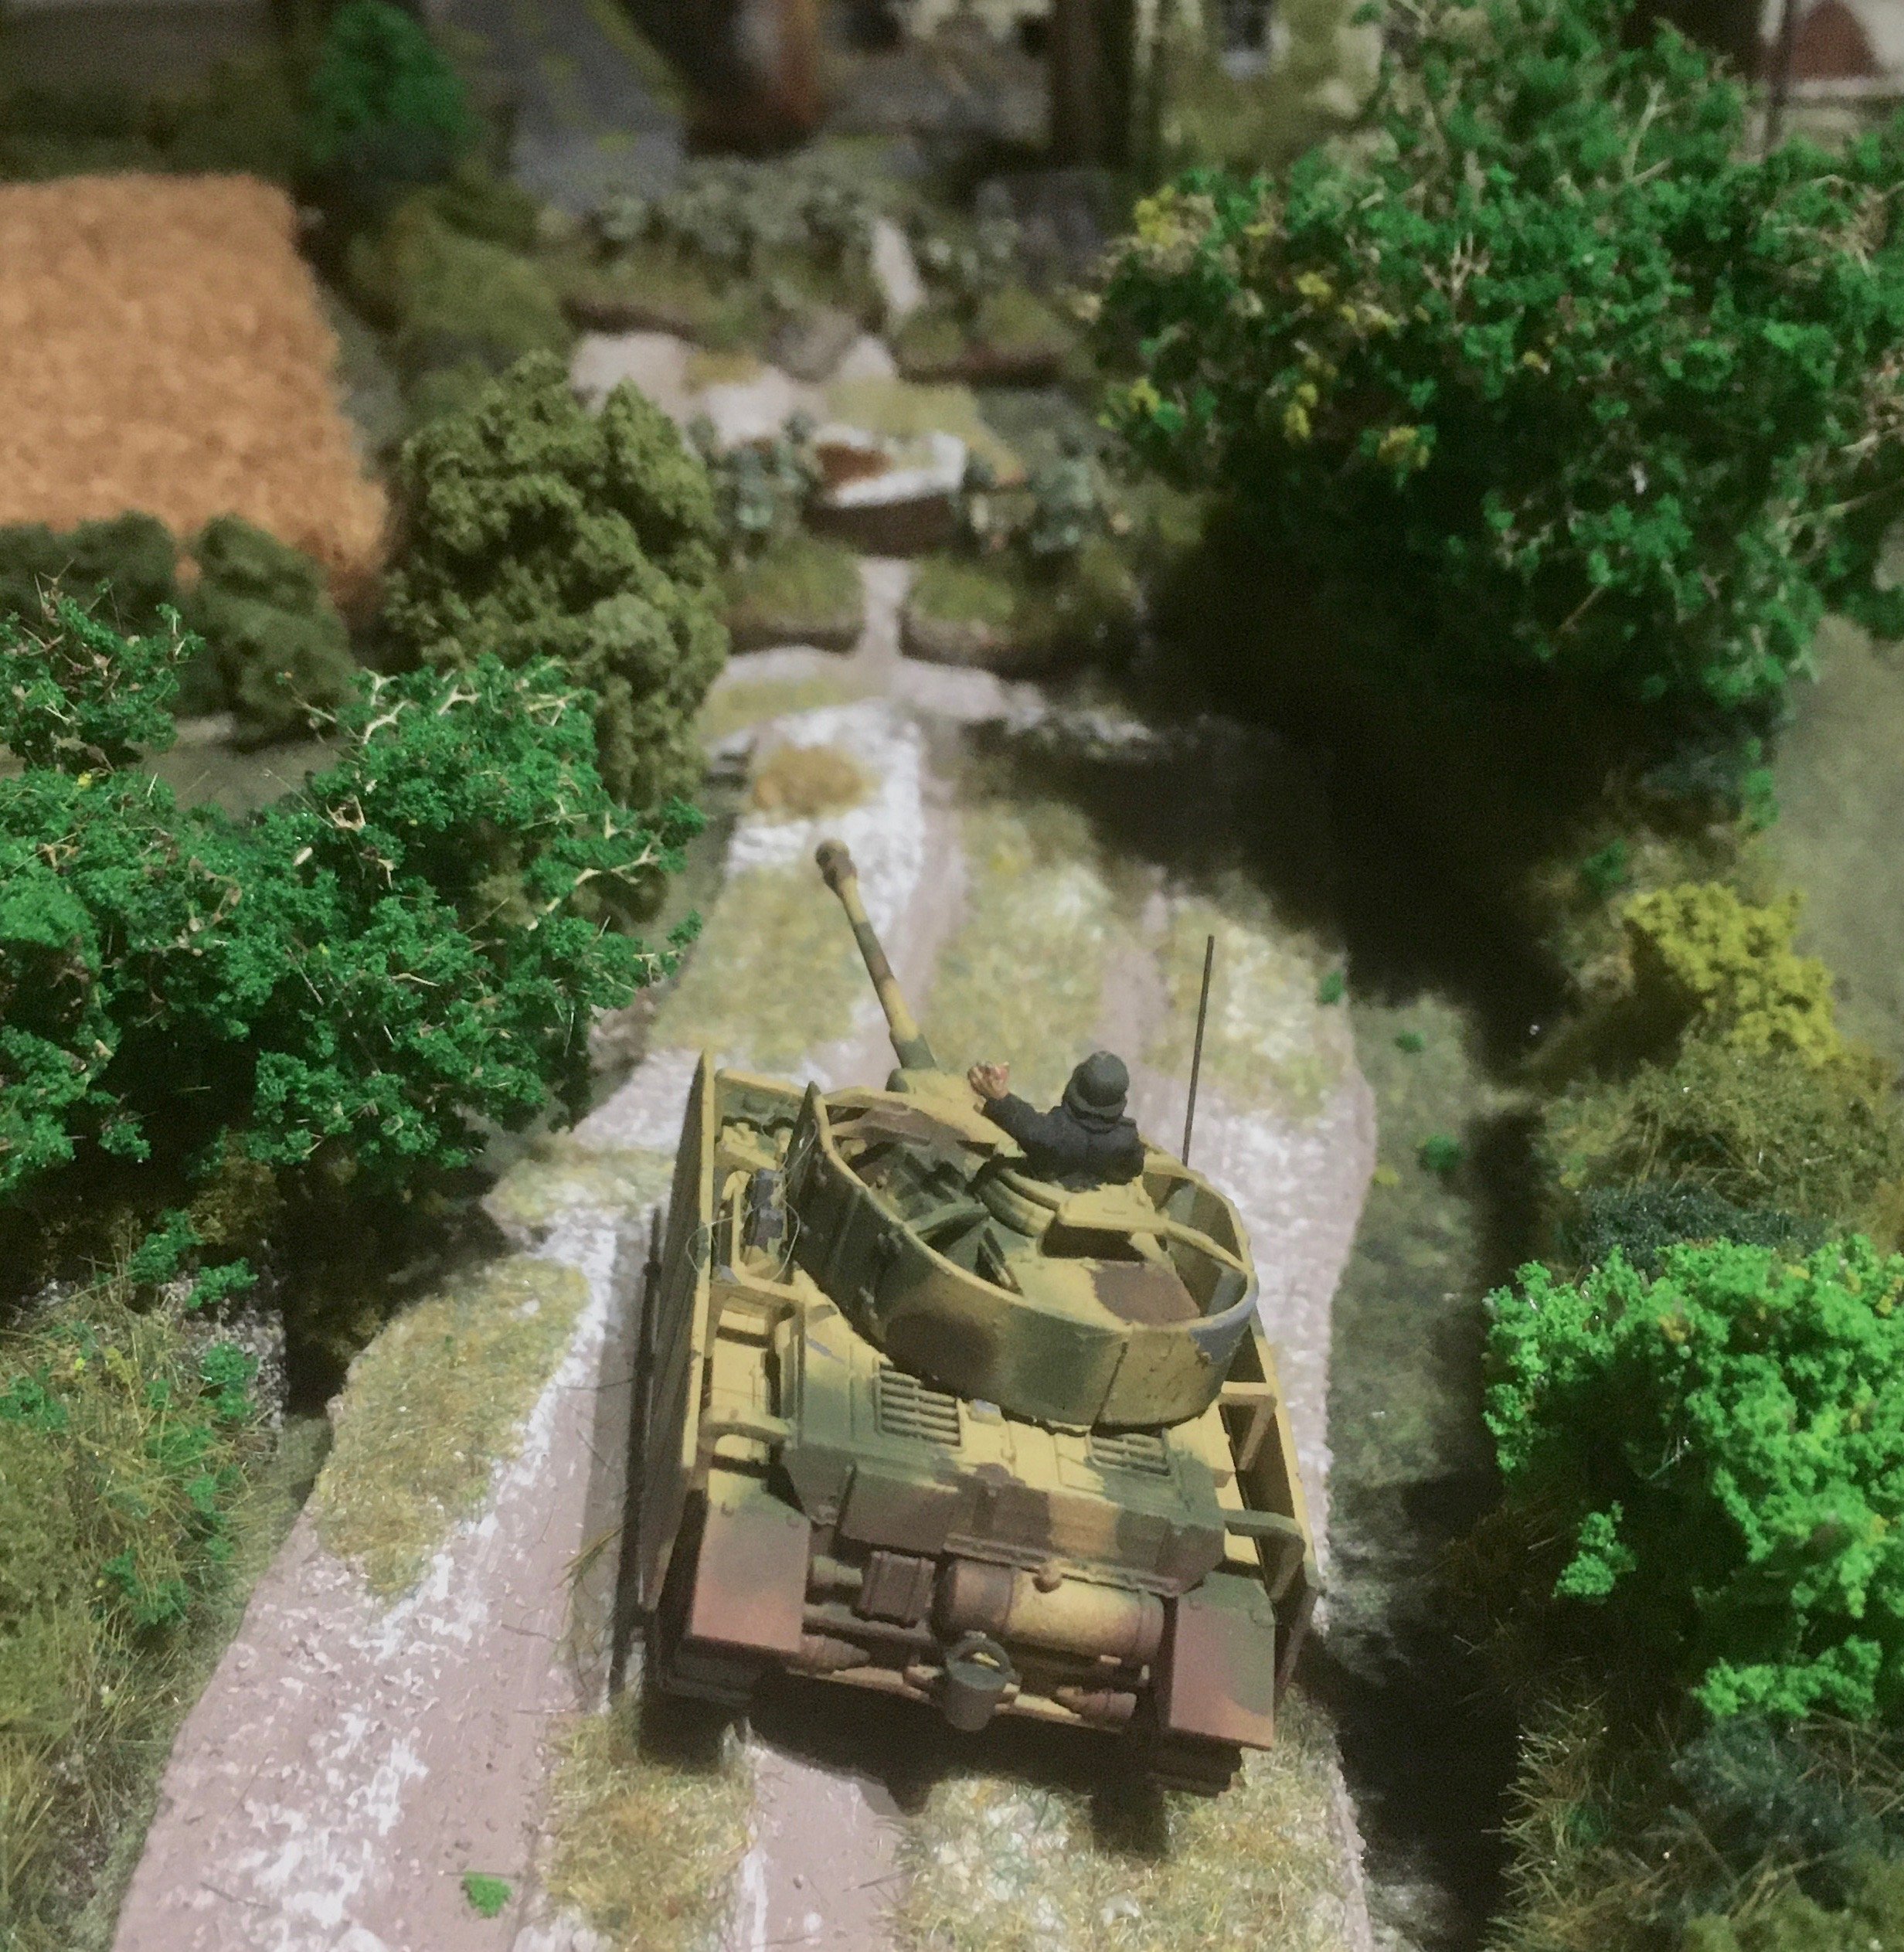 She pushed a Panzer IV down the road towards the enemy infantry...